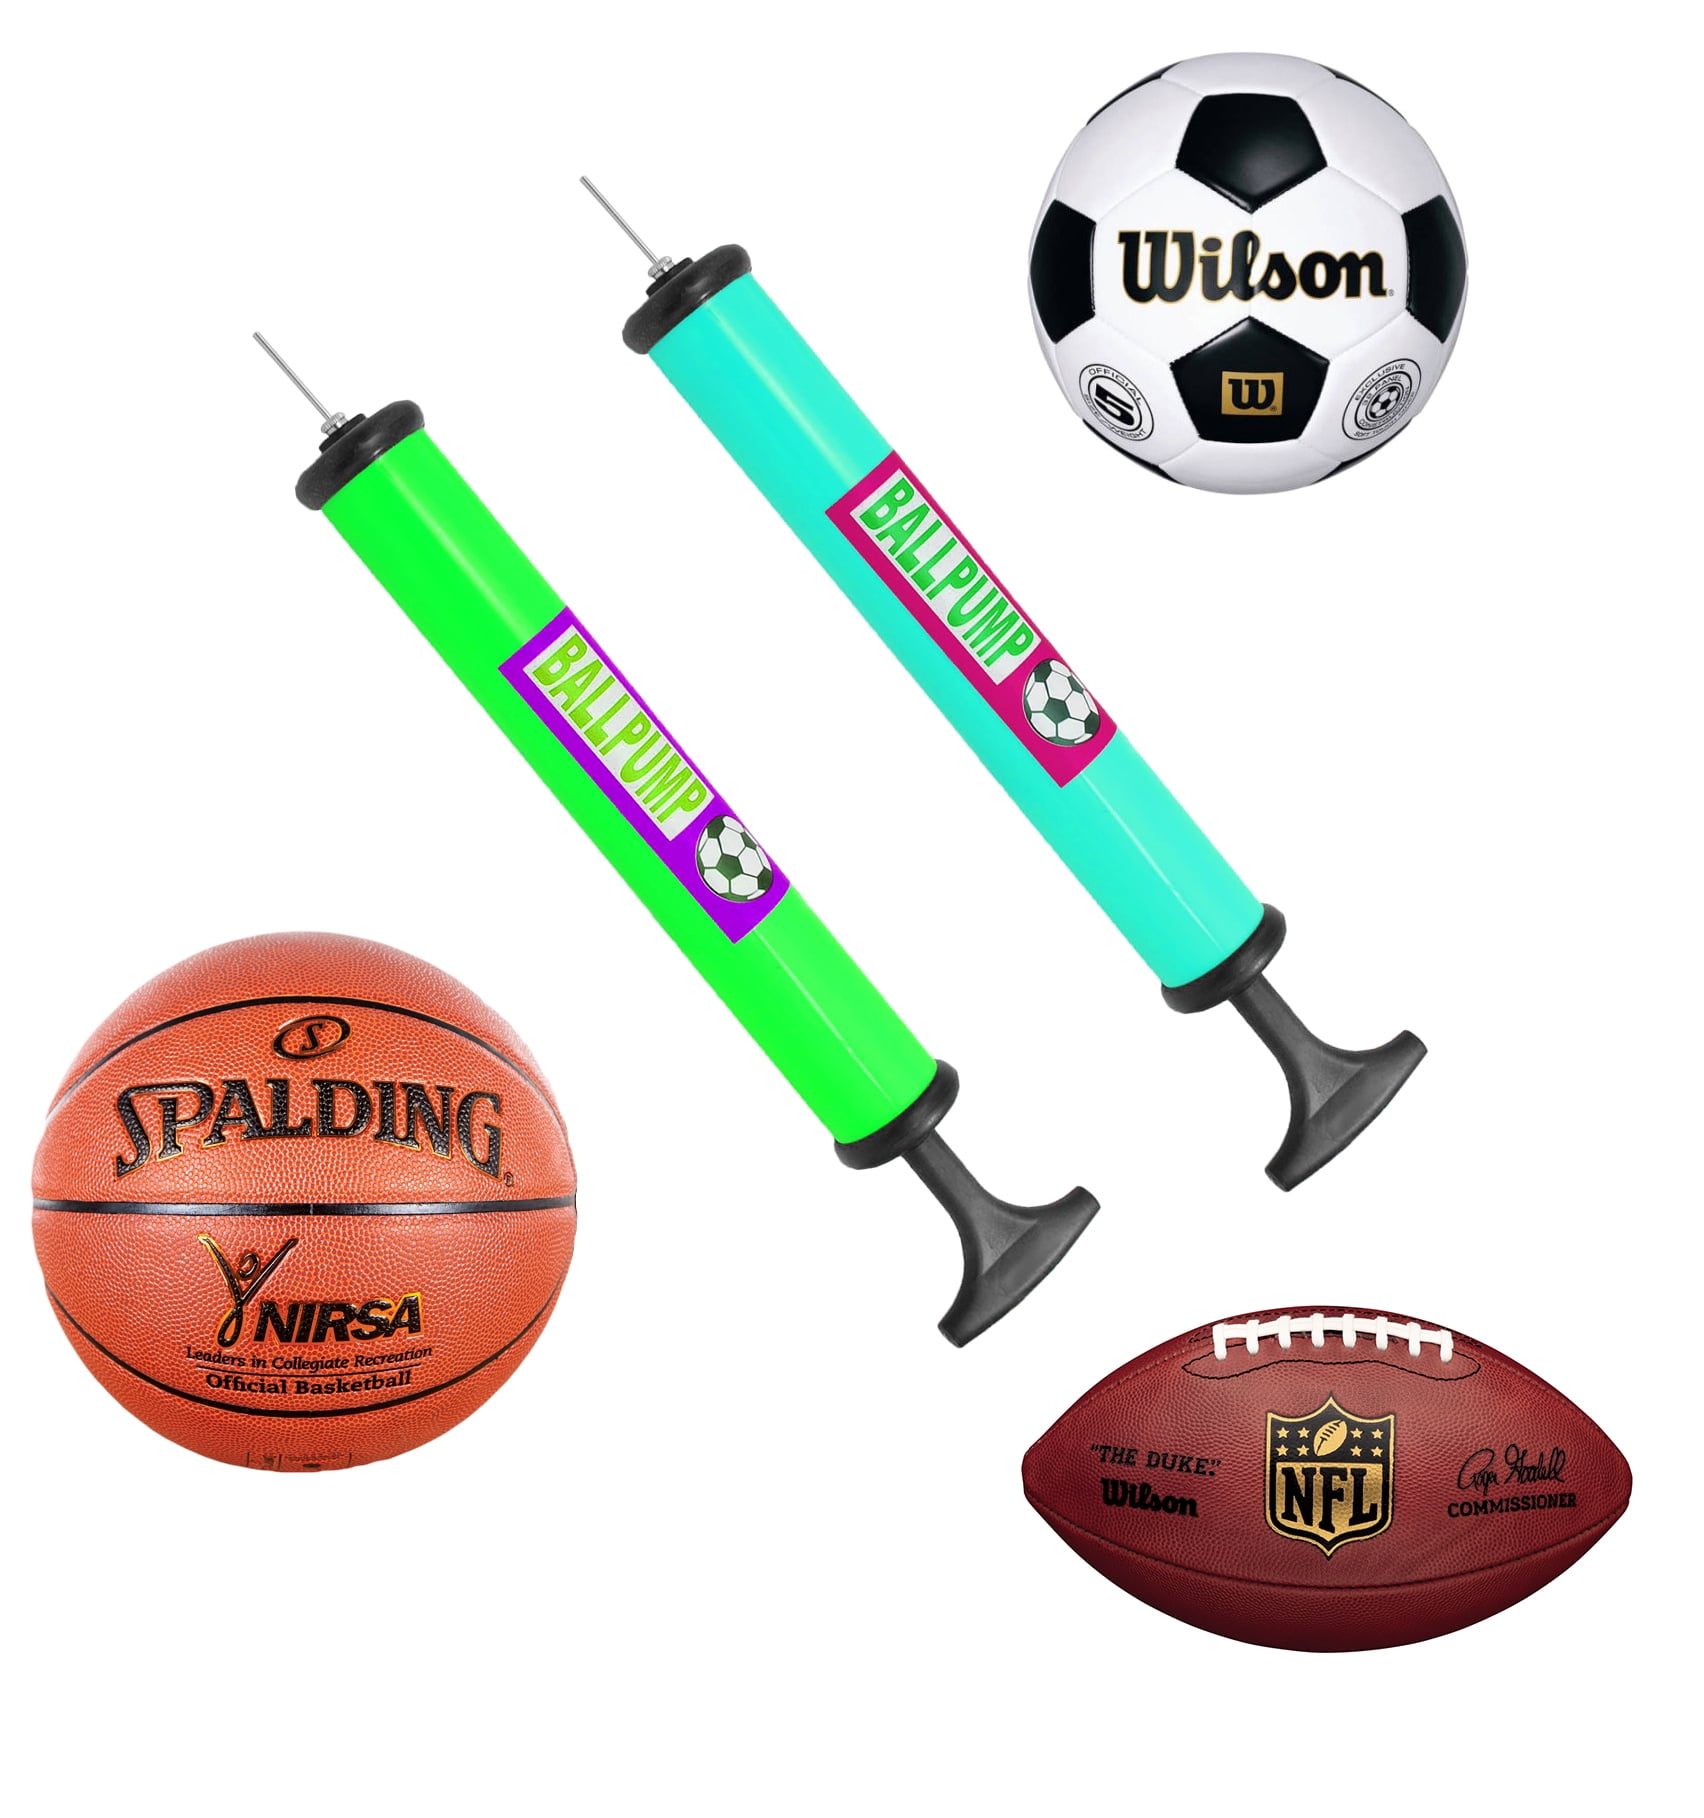 Needles and Nozzles Included Dimples Excel Dual Action Ball Pump for Soccer Basketball Football Volleyball Water Polo ball 